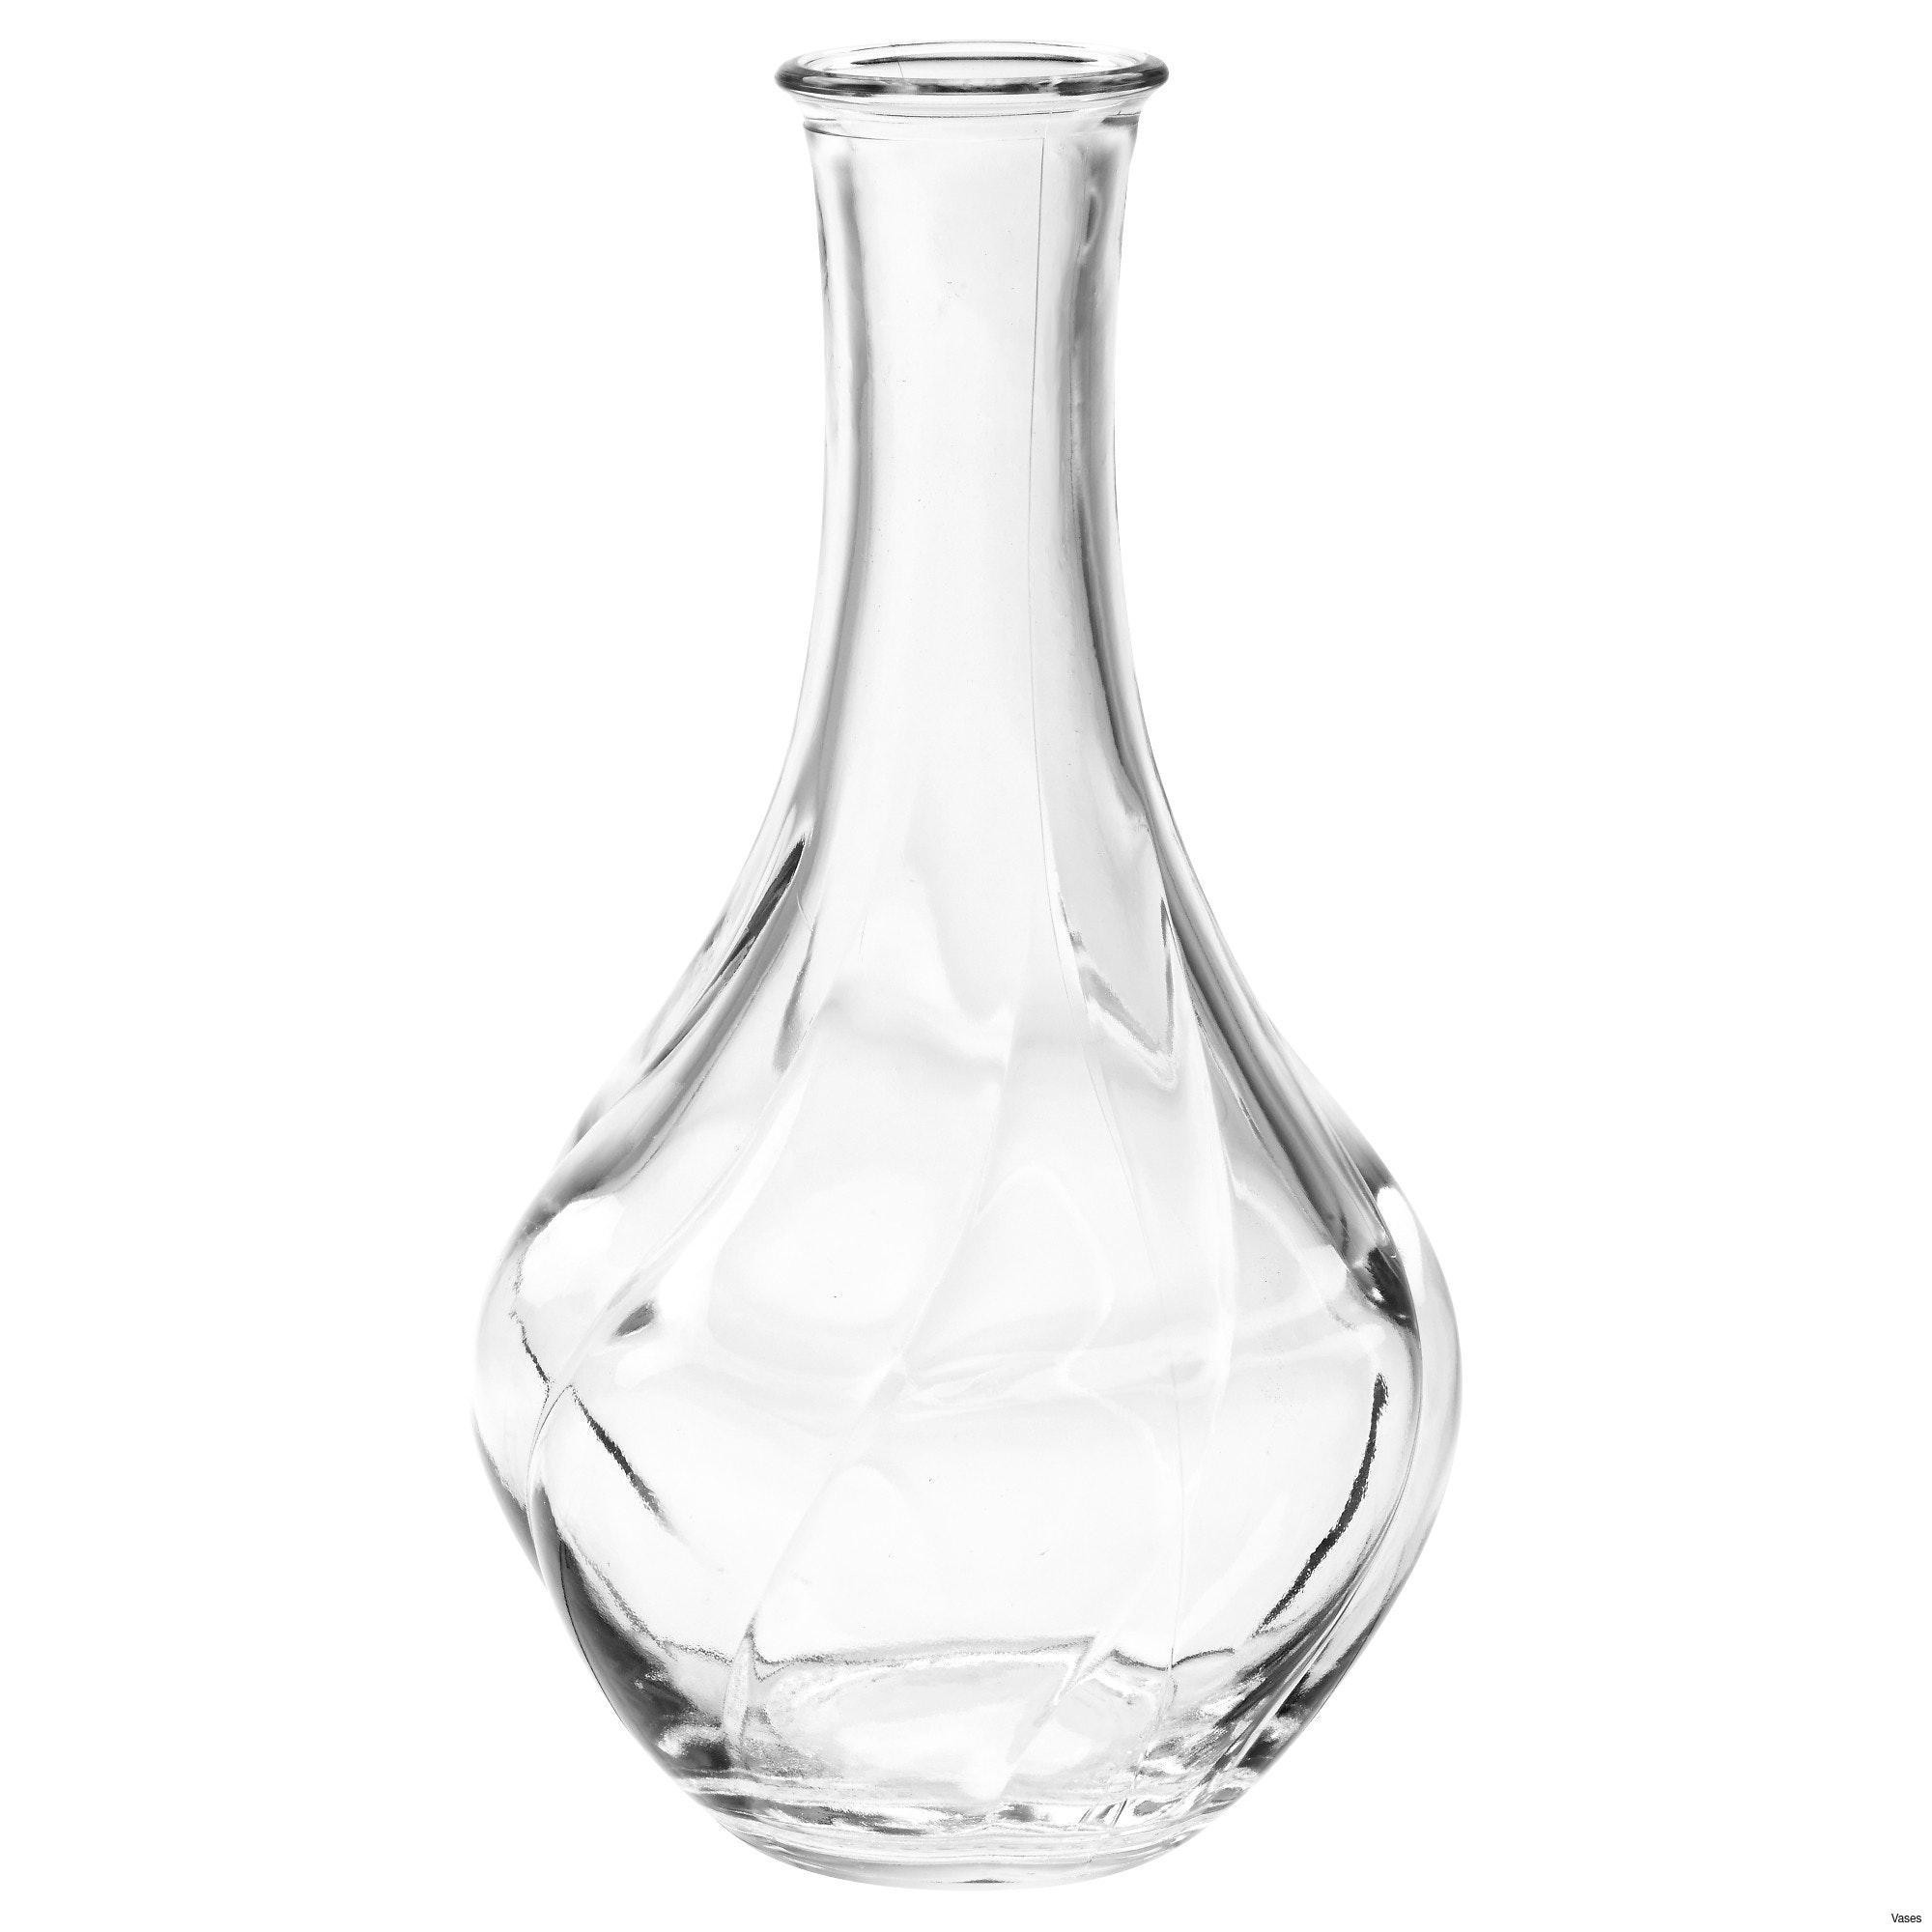 25 Ideal Libbey Glass tower Vase 2023 free download libbey glass tower vase of white large vase photos wedding simple wedding new il fullxfull h within white large vase images living room glass vases fresh clear vase 0d tags amazing and of